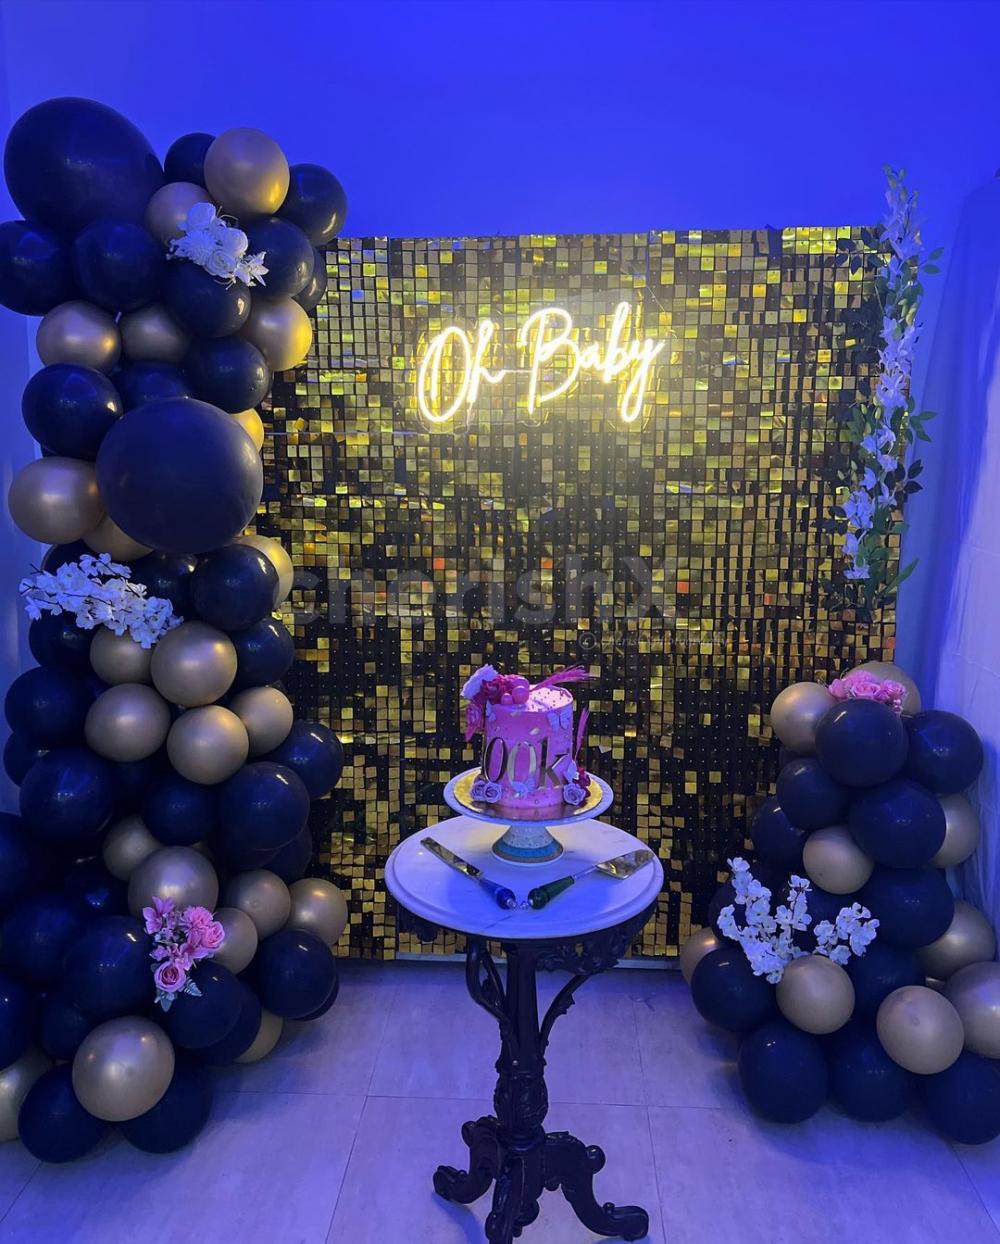 The oh baby neon signage is an exclusive addition that adds a vibrant touch to the venue